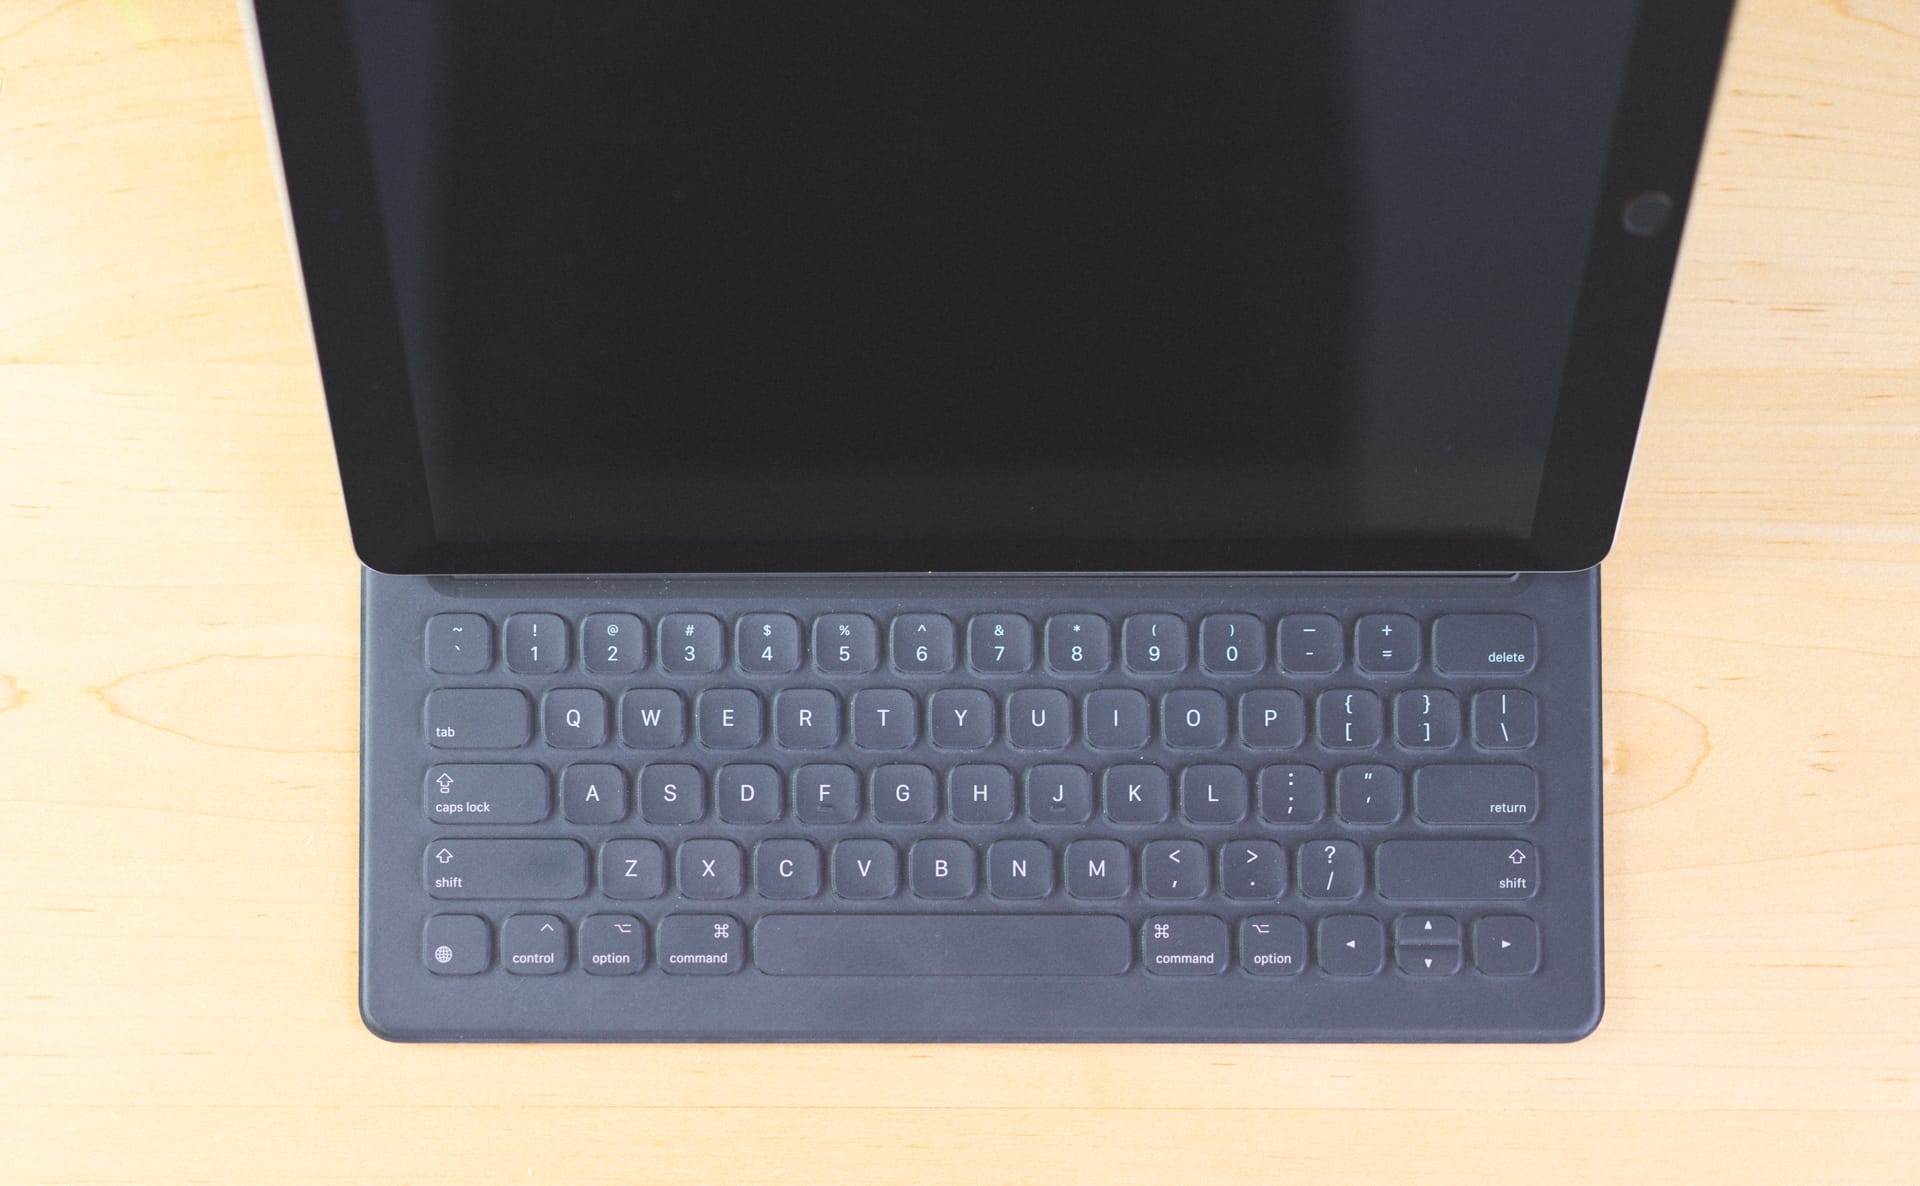 Apple Pencil and Smart Keyboard